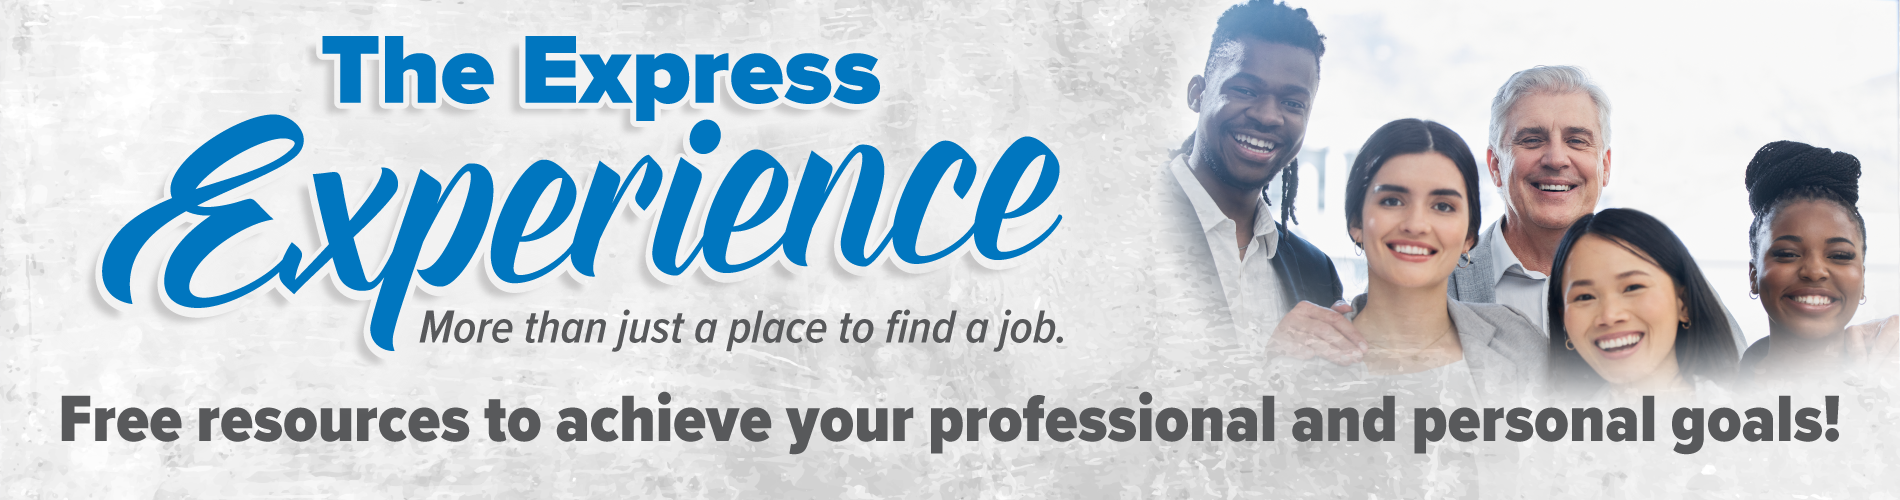 Express-Experience-Banner-Office-Services